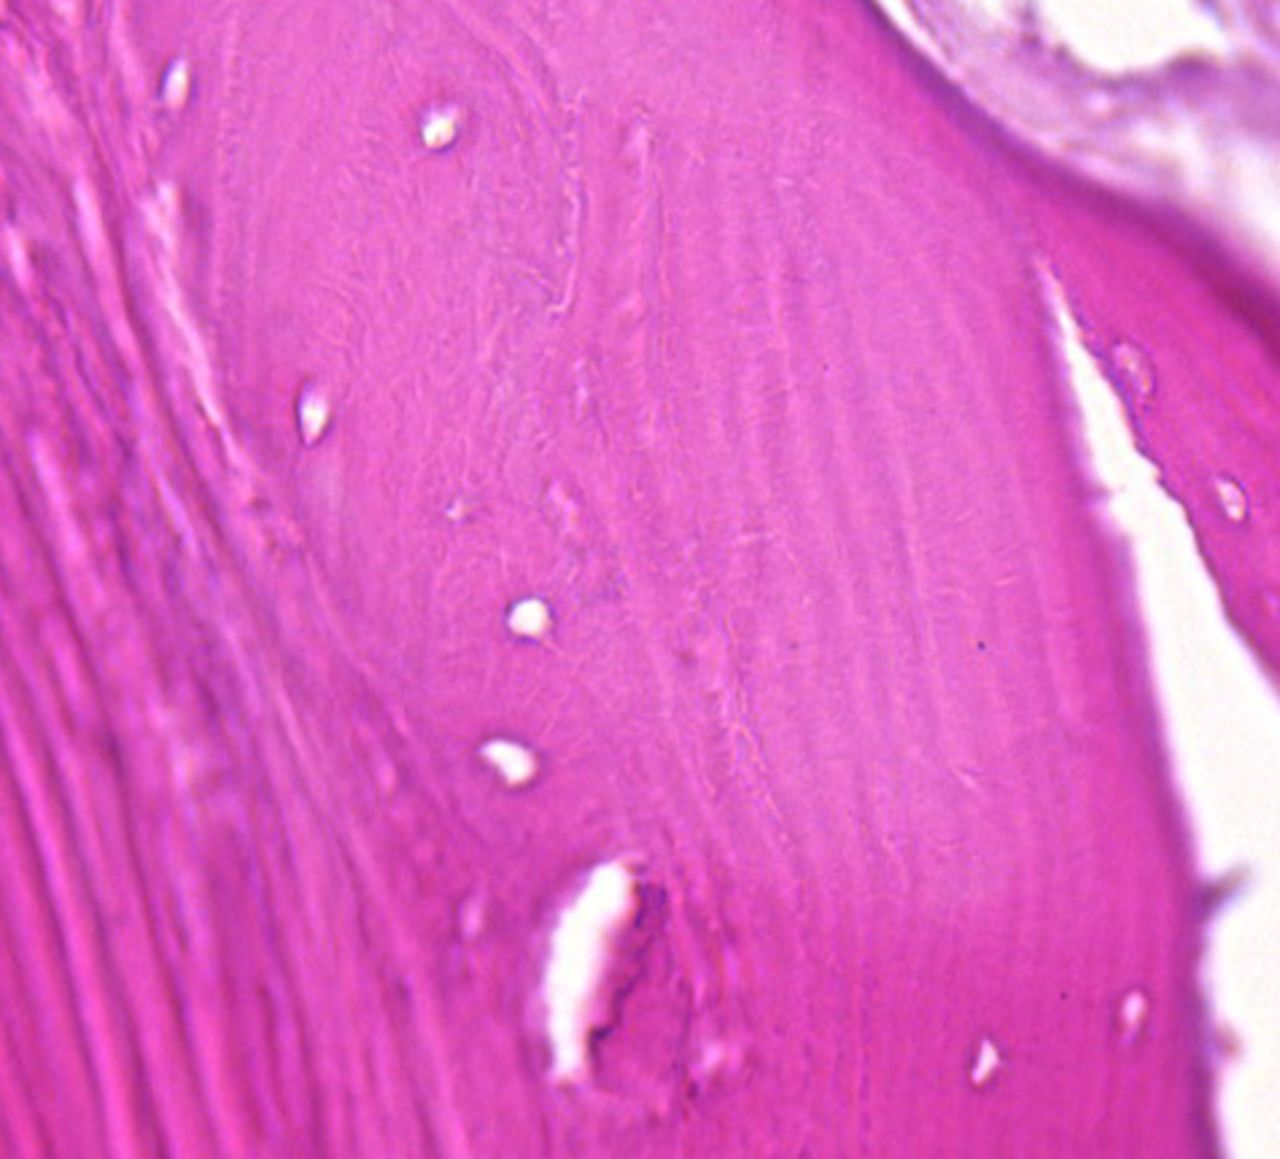 Figs. 4a - 4b 
            Slide from a) the non-posterior
group showing nucleated lacunae (magnification ×20) and b) the hip
with avascular necrosis, showing mostly empty lacuna (magnification
×40, both haematoxylin and eosin).
          